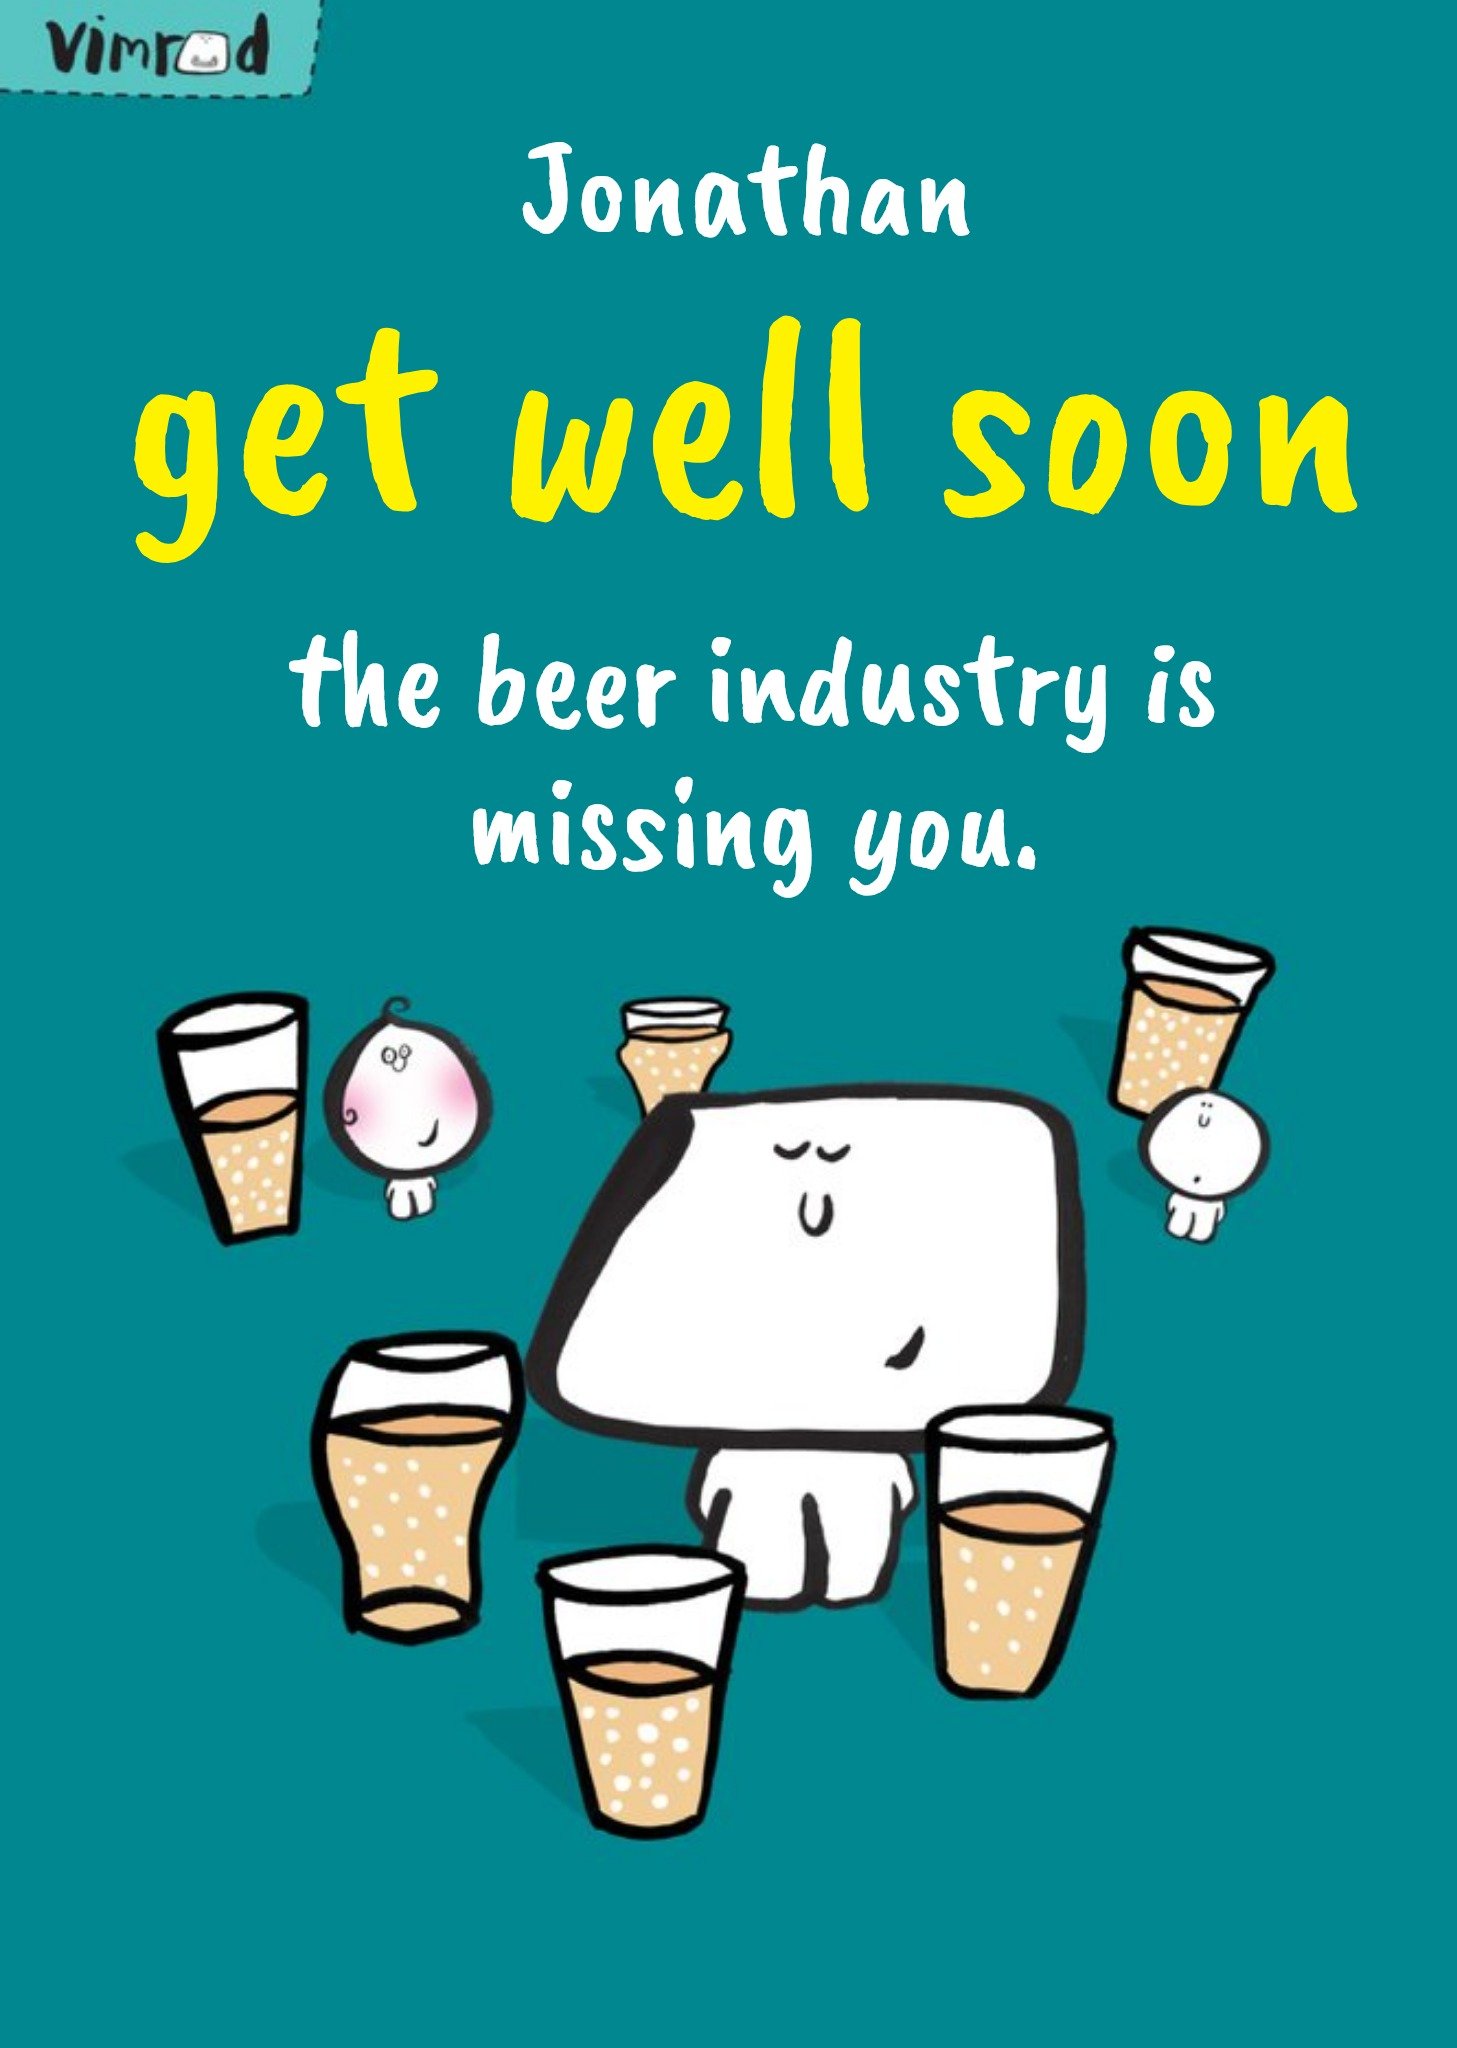 Moonpig Vimrod The Beer Industry Card Is Missing You Personalised Get Well Soon Card, Large